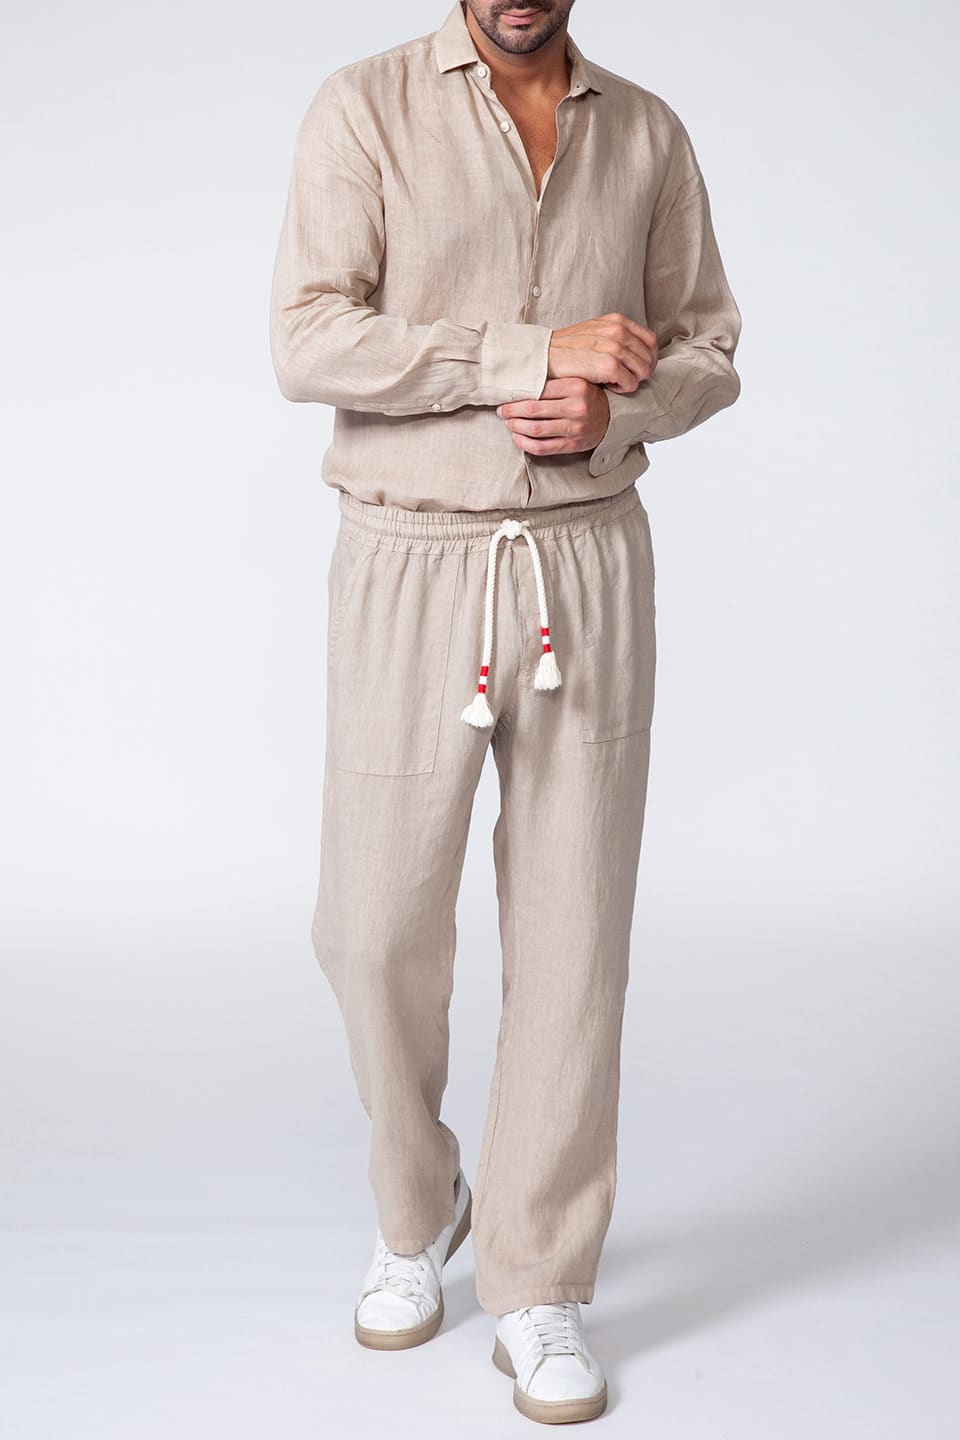 Thumbnail for Product gallery 3, MC saint barth male calais trousers beige front detail